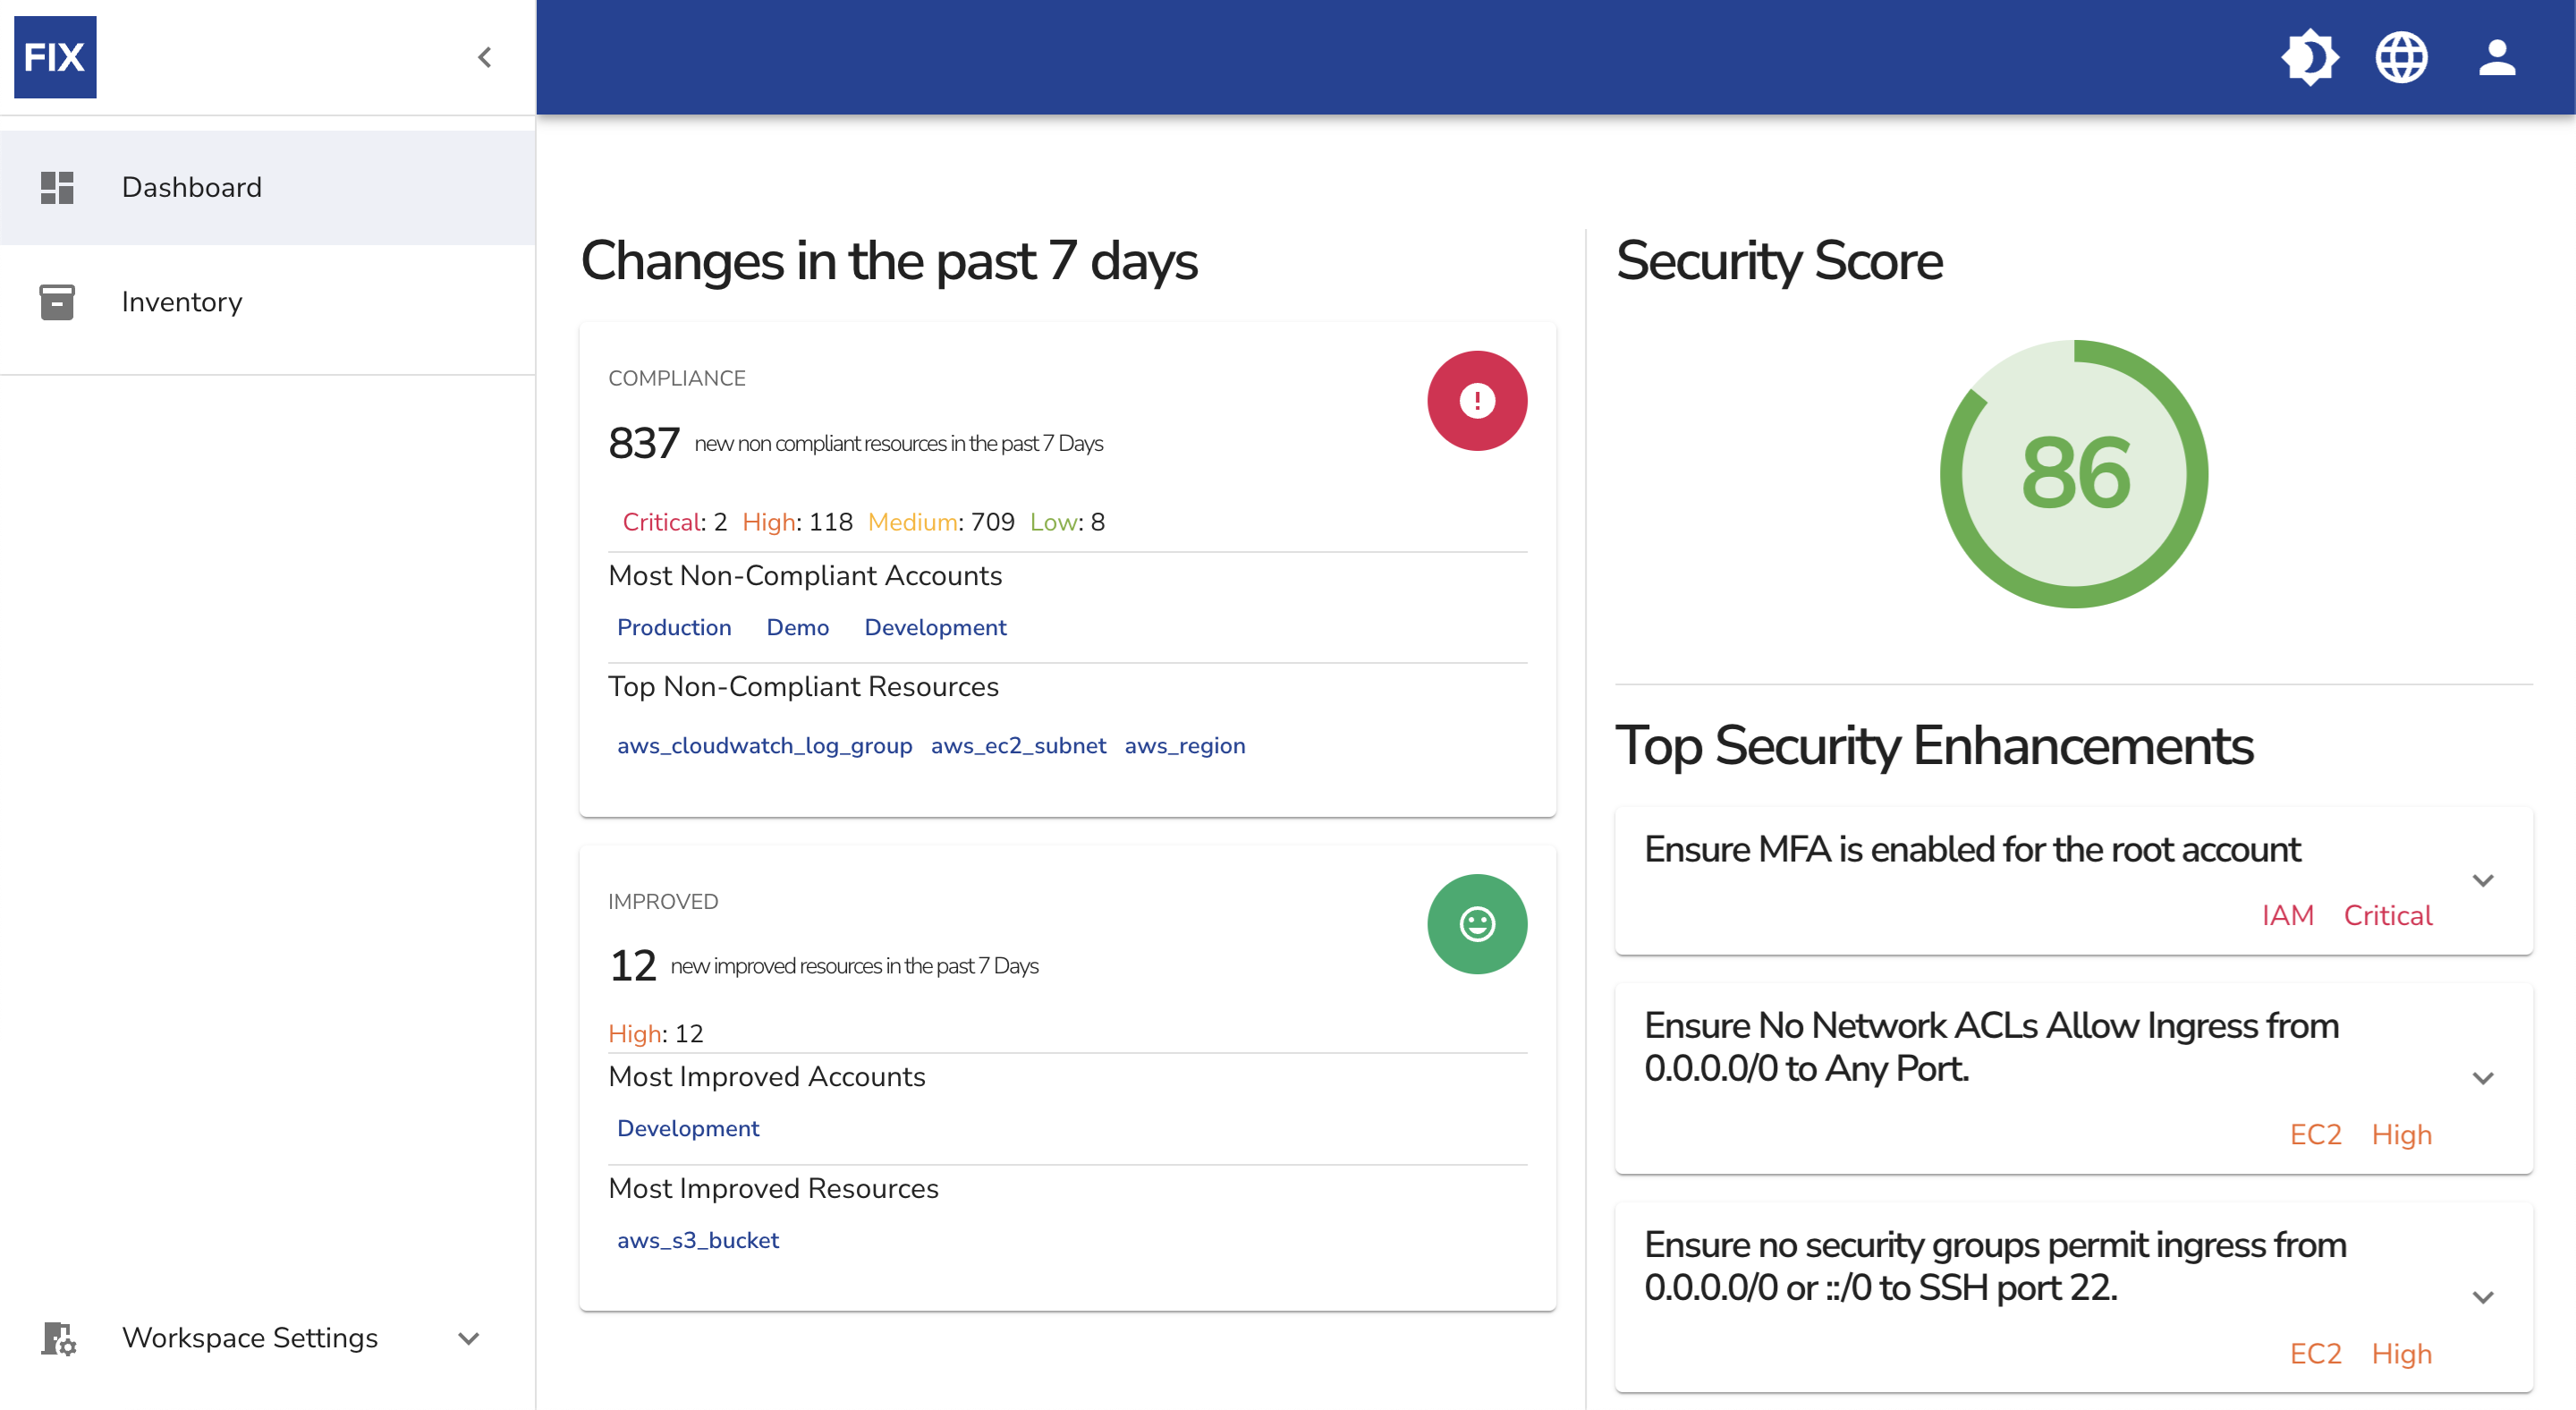 Fix dashboard displays changes detected in the last week, security score, and top 5 possible security enhancements.